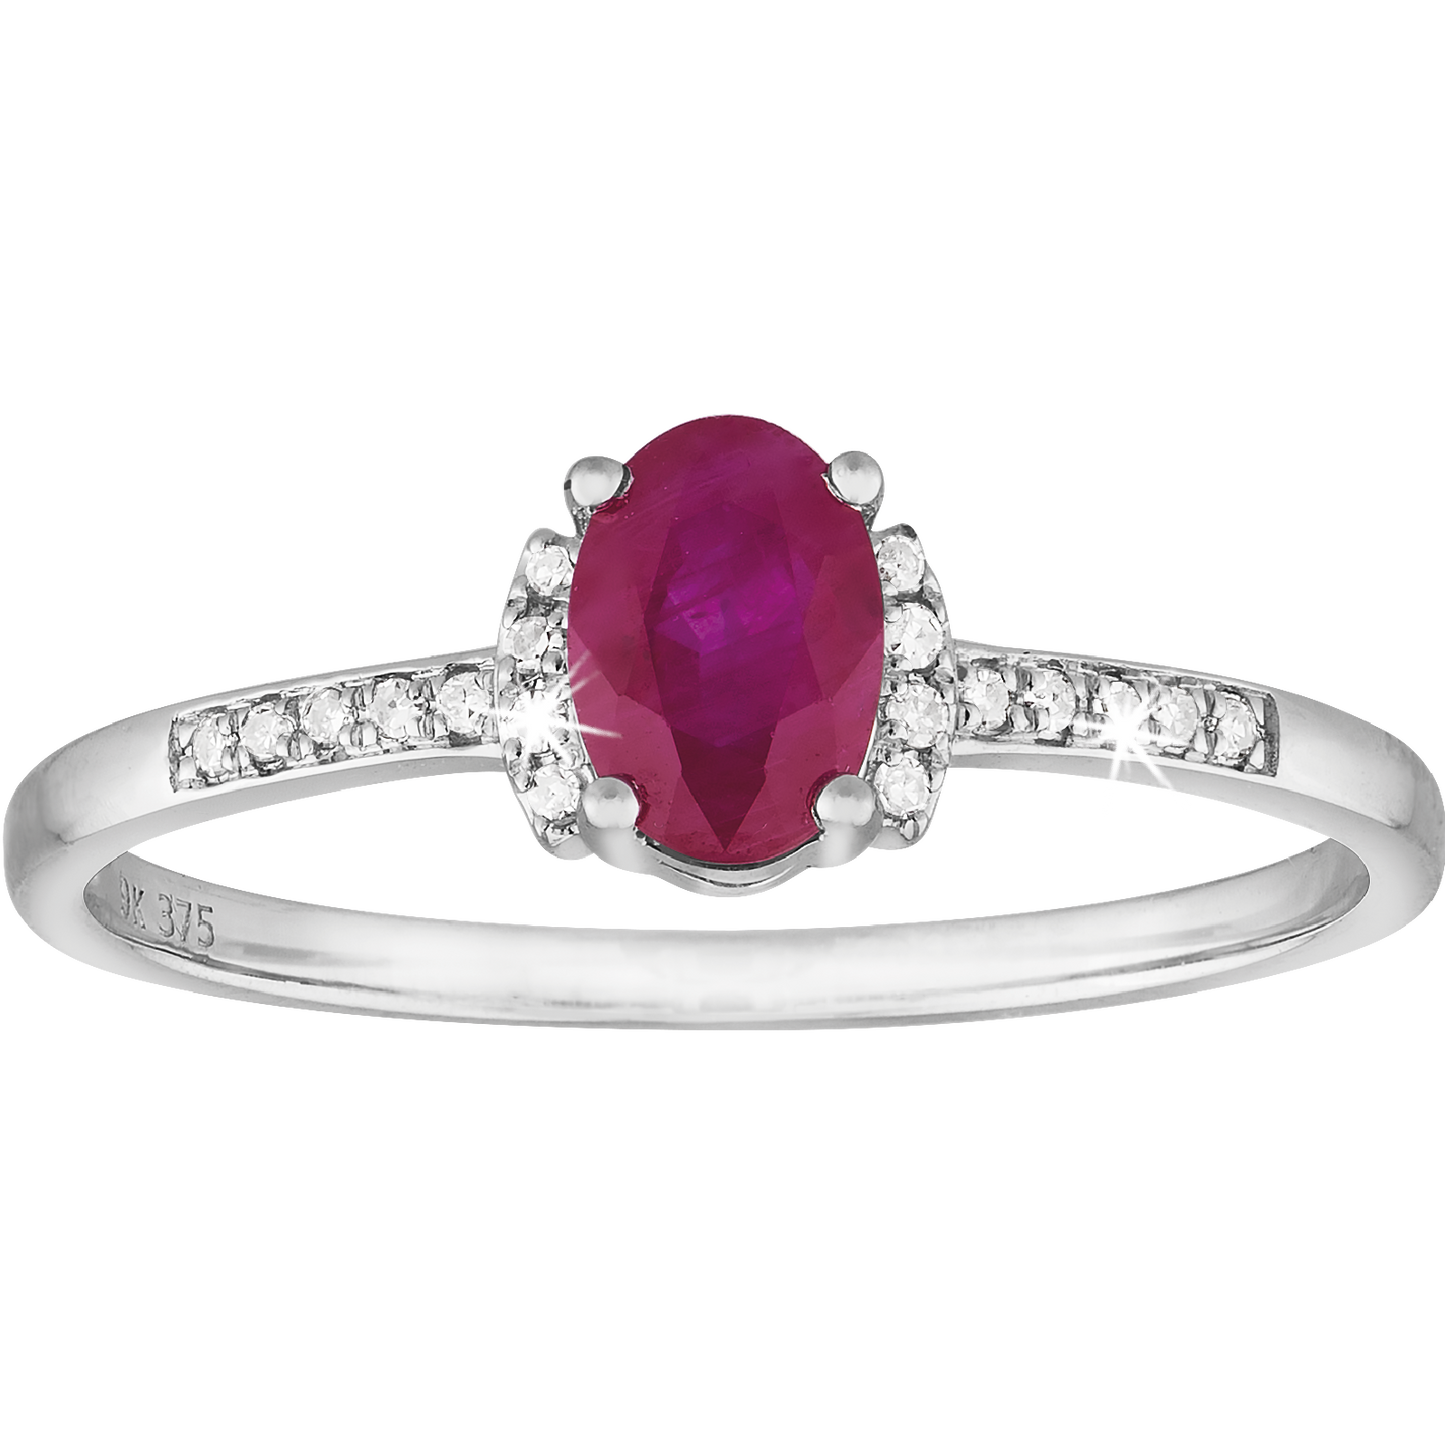 0.05ct Diamond and Ruby Grip Ring in 9ct White Gold